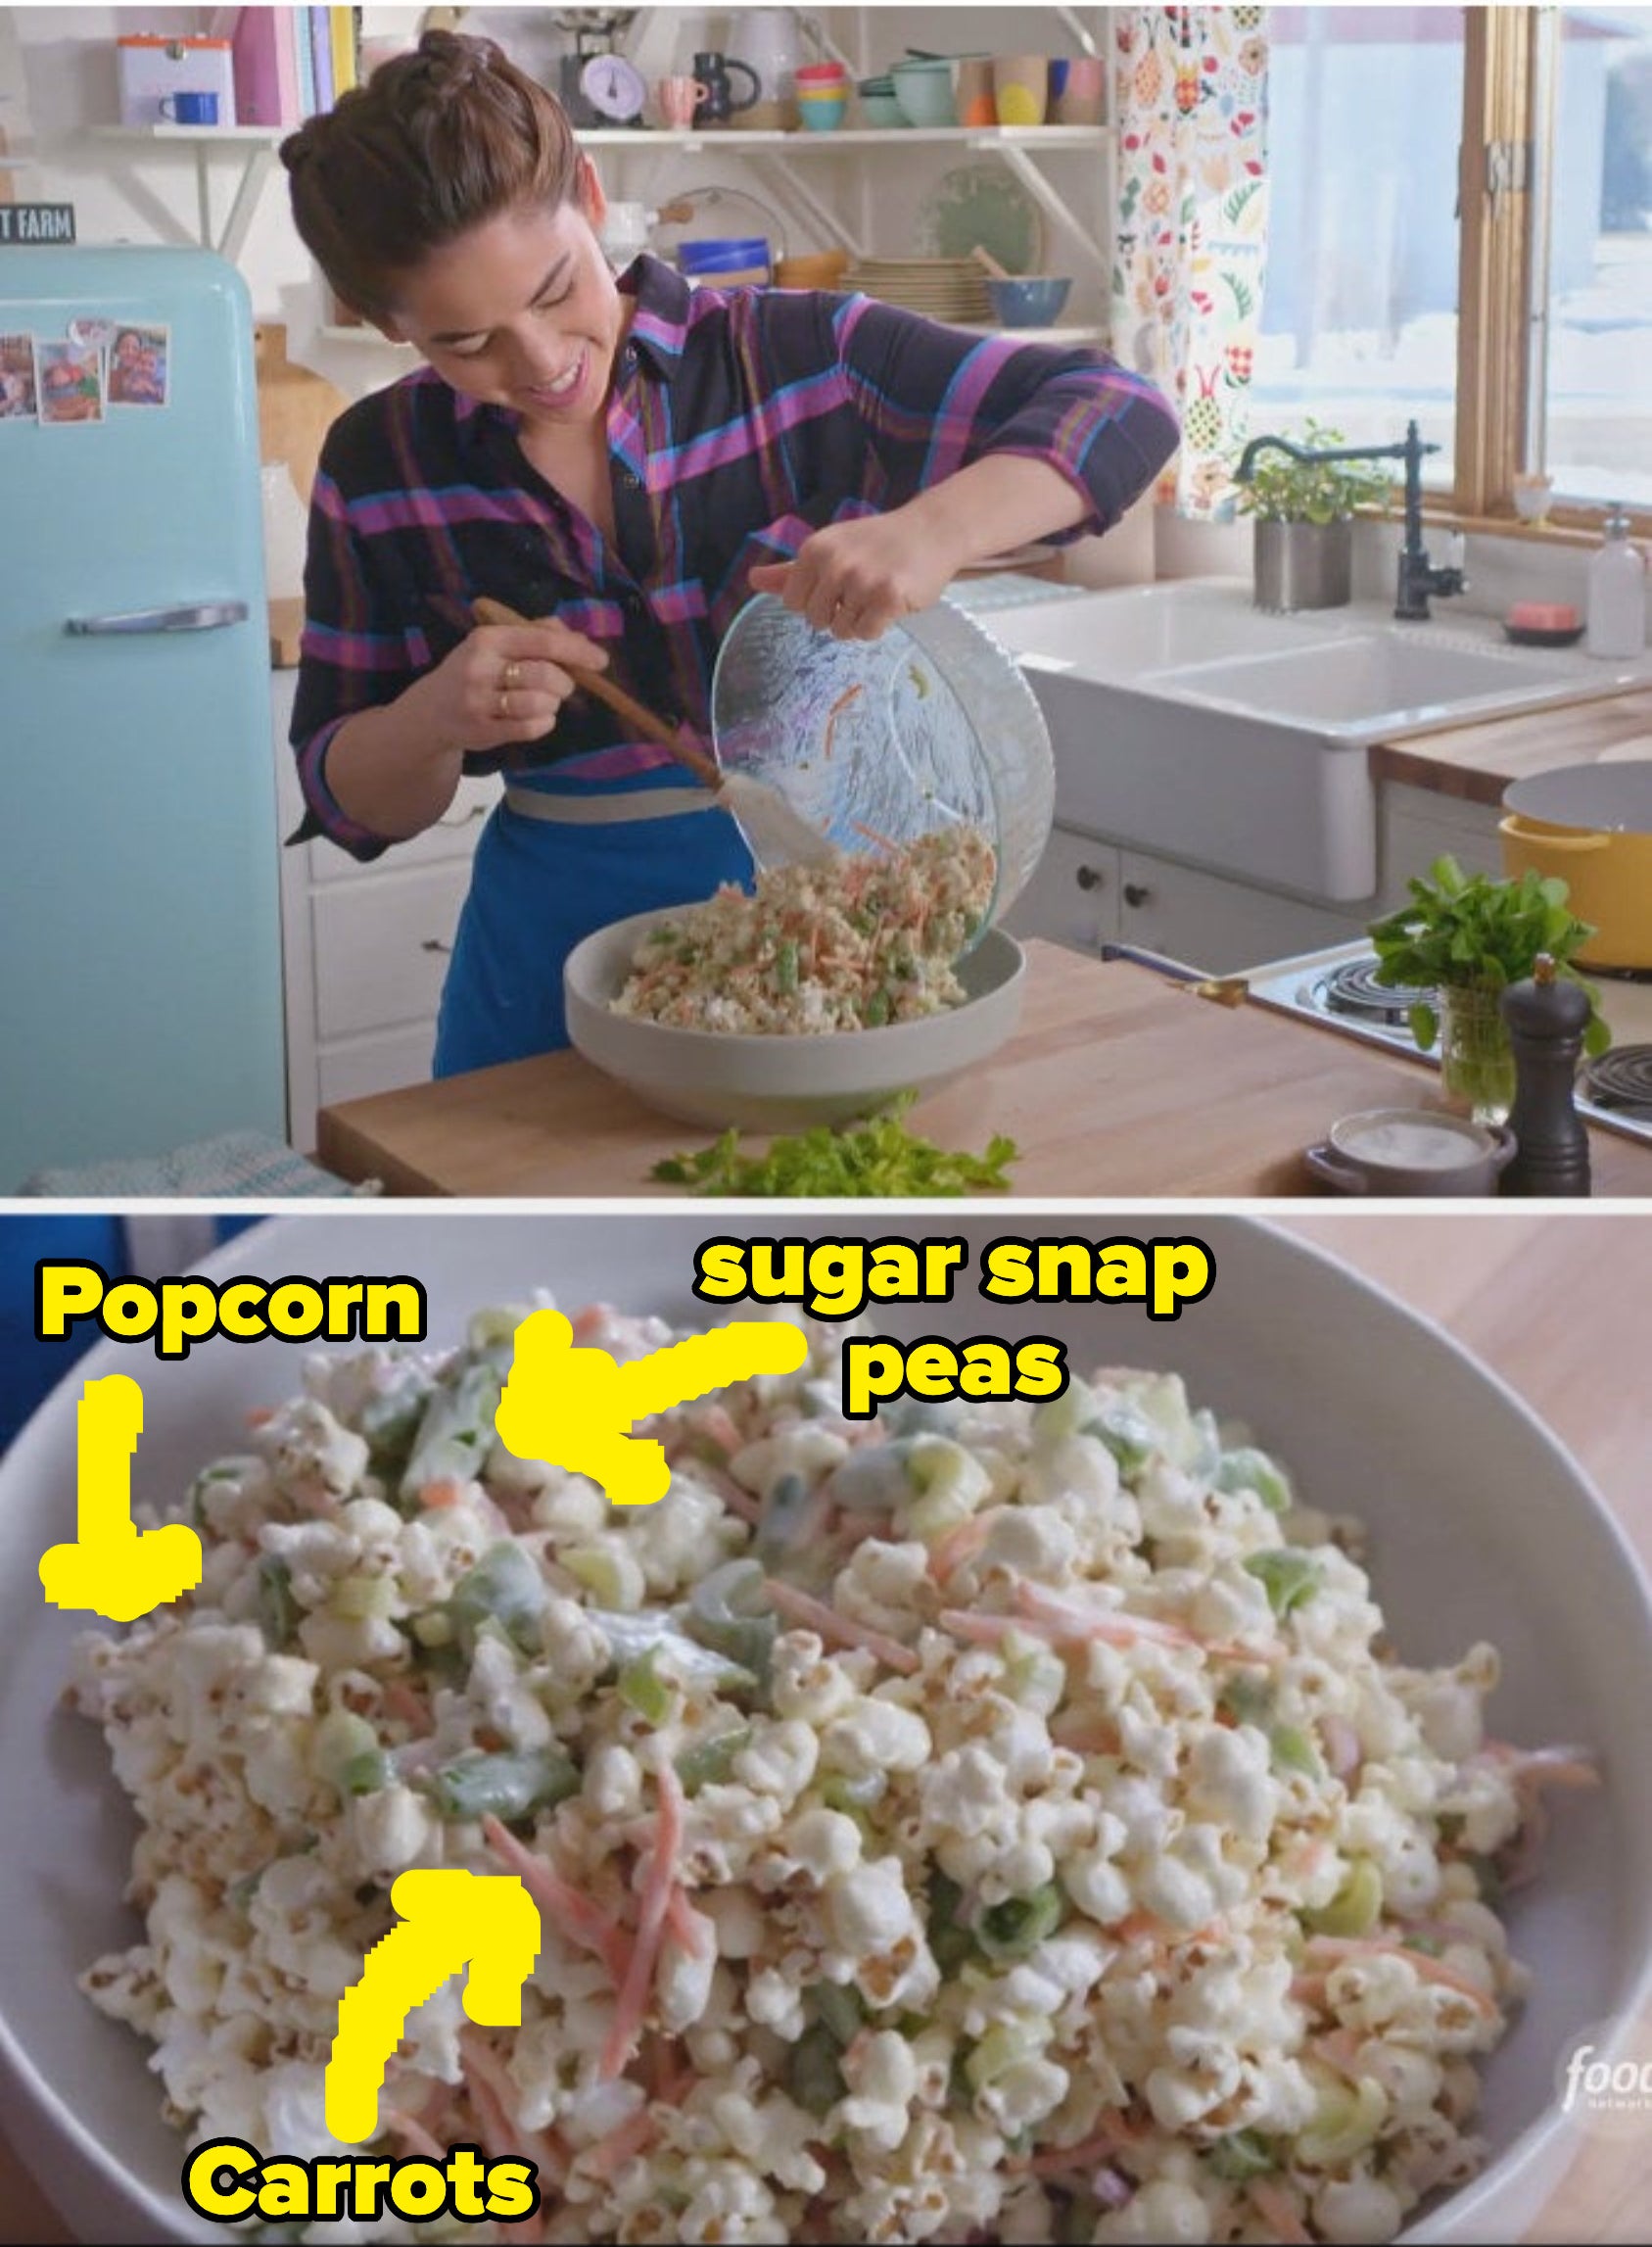 Top: Chef Molly Yeh pours a bowl of popcorn salad into a baking dish Bottom: A closeup of a bowl of popcorn salad with ingredients like popcorn, carrots, and sugar snap peas listed